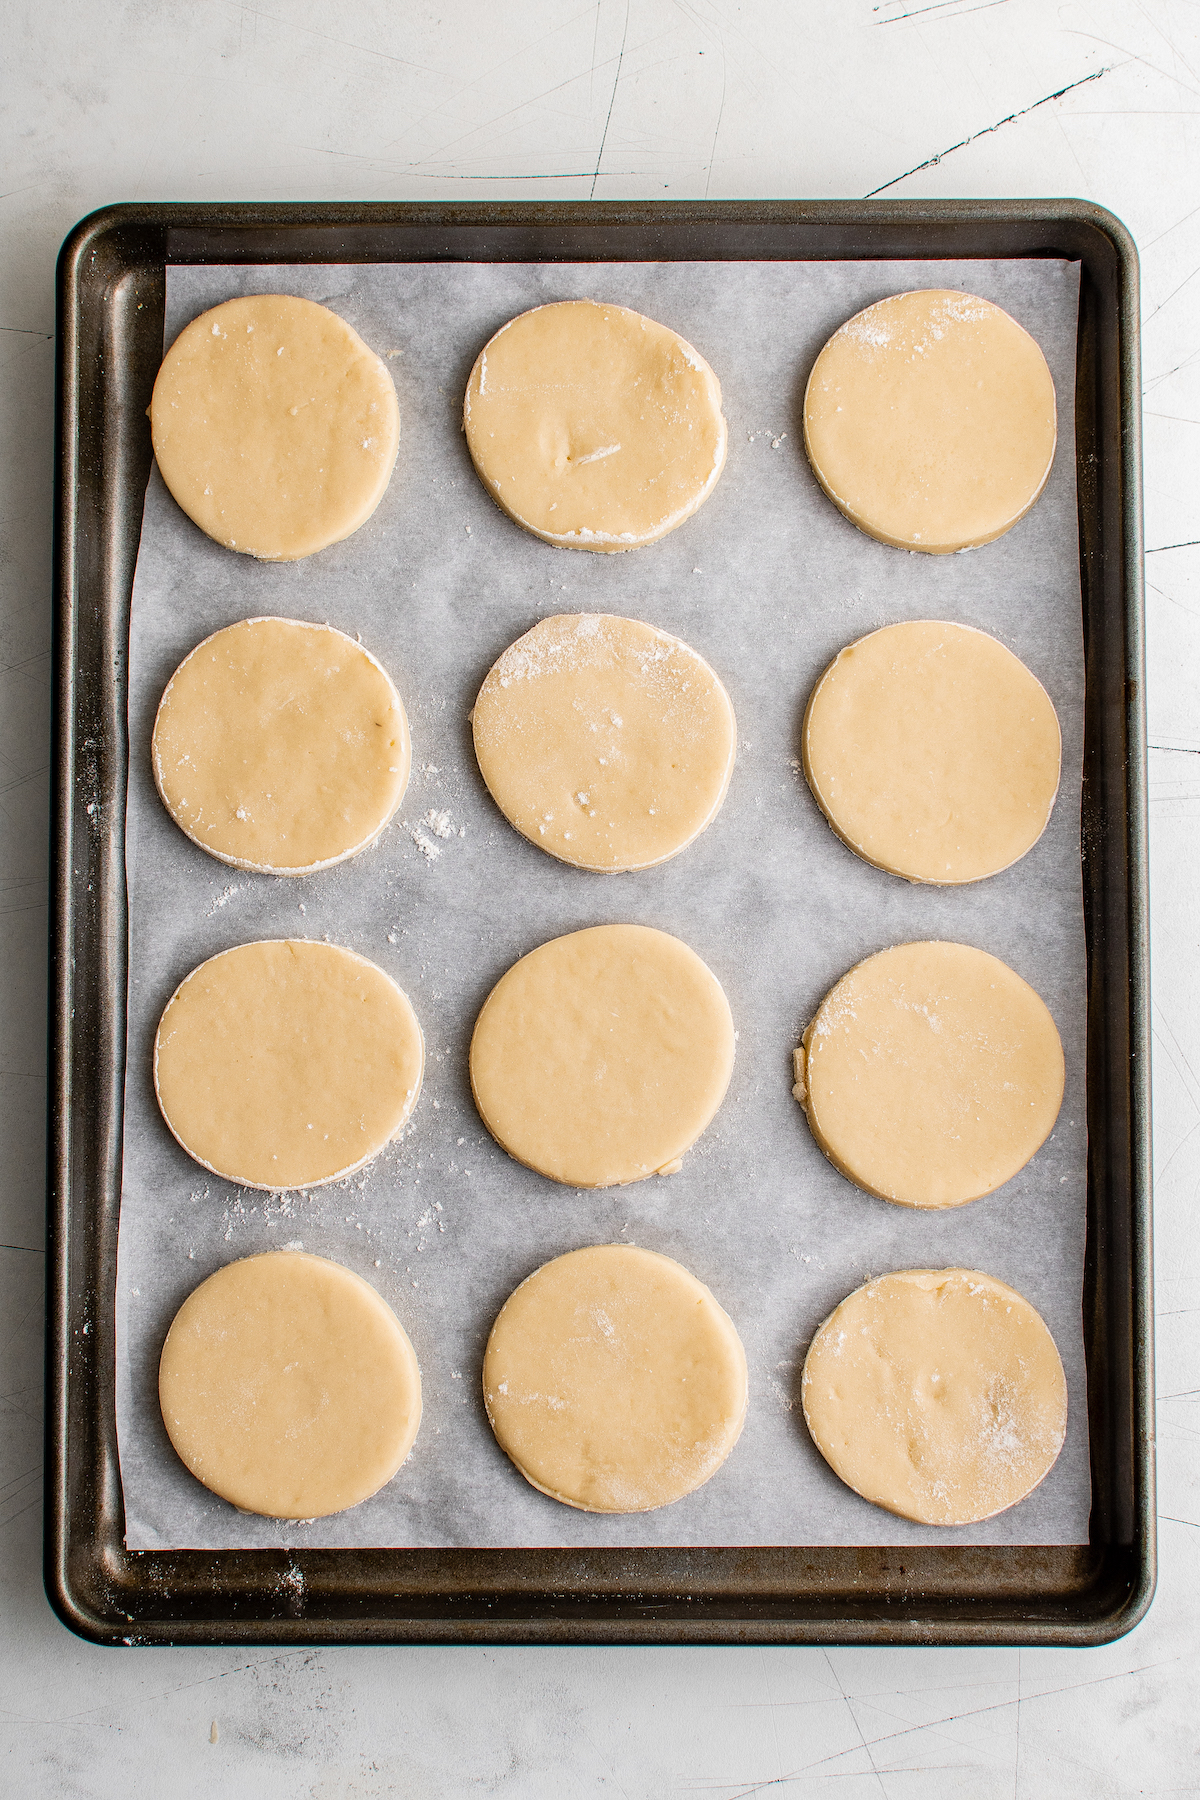 Circles of unbaked dough on a baking sheet.